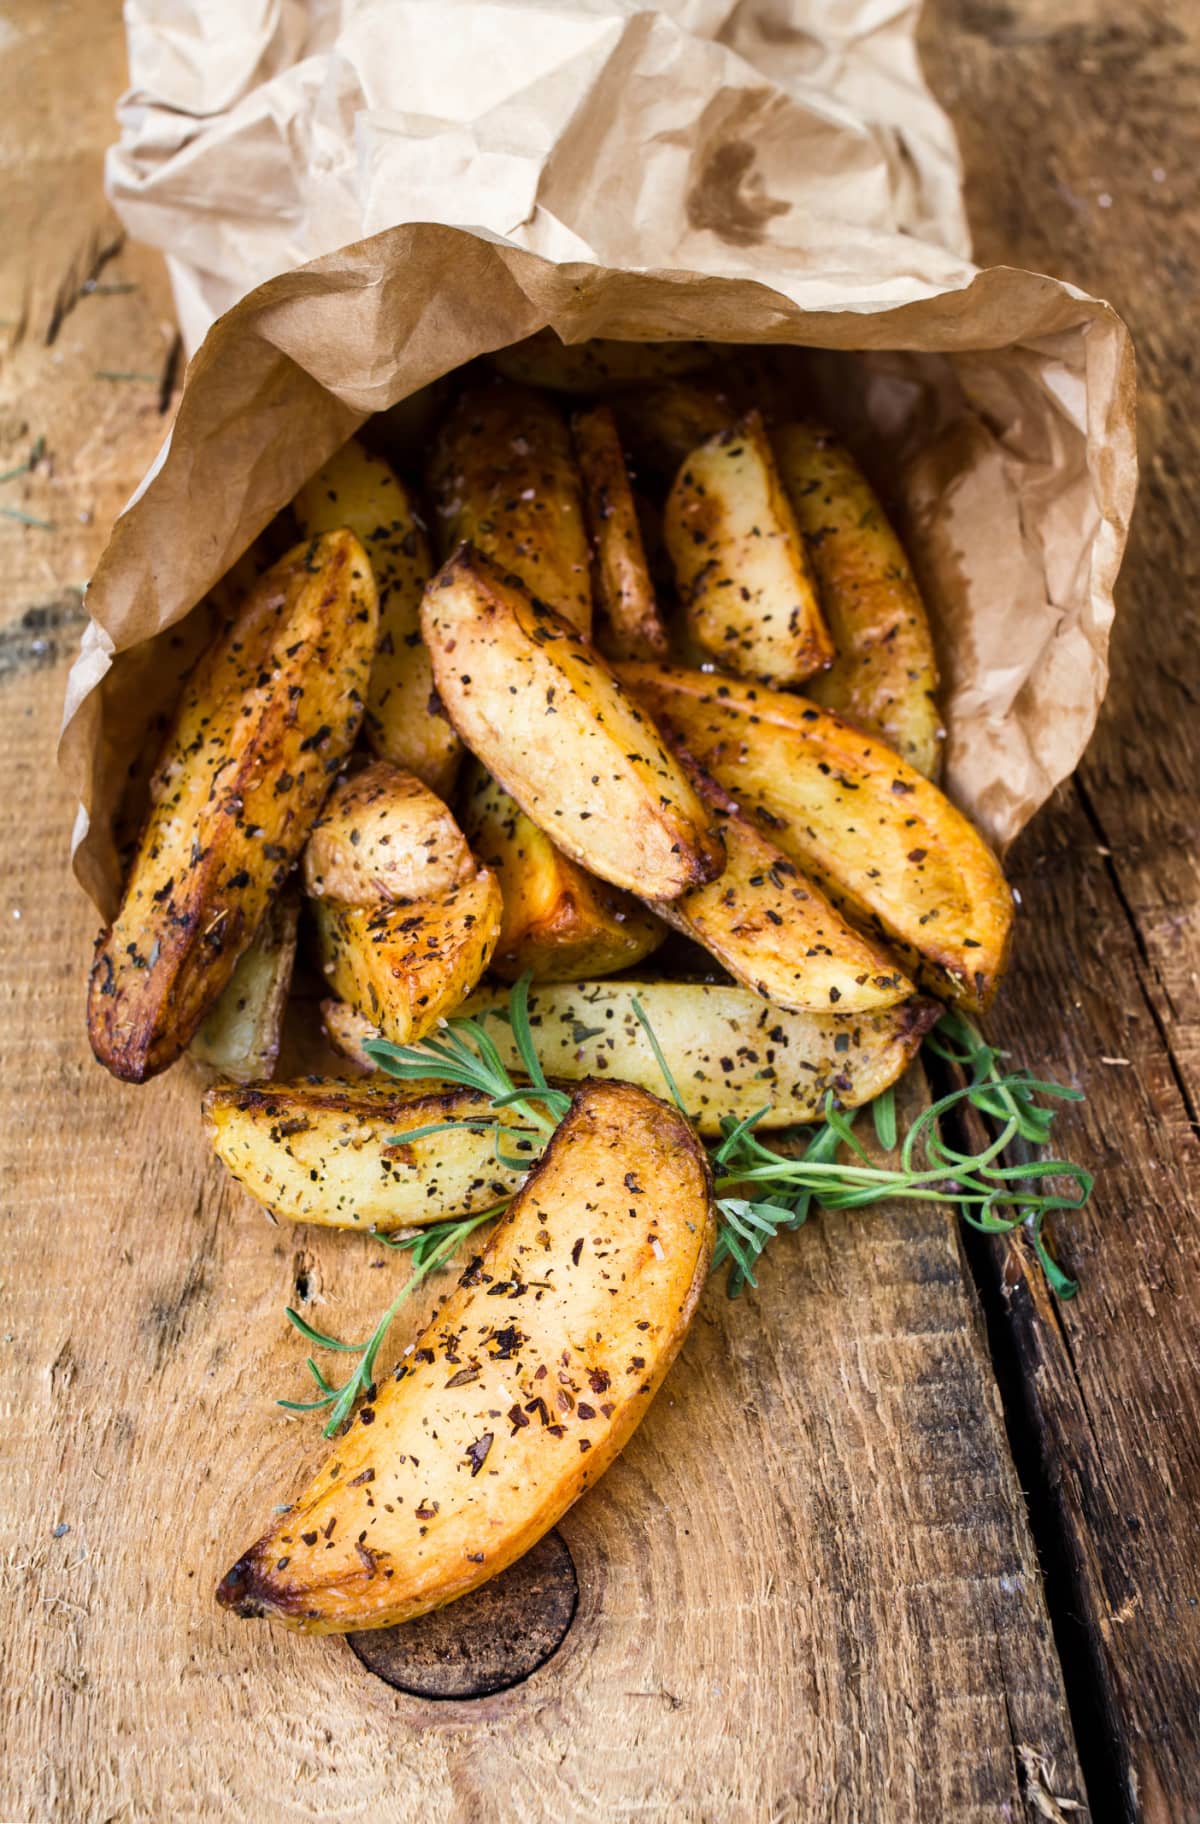 French fries potato wedges in recycled kraft paper bag on wooden old background